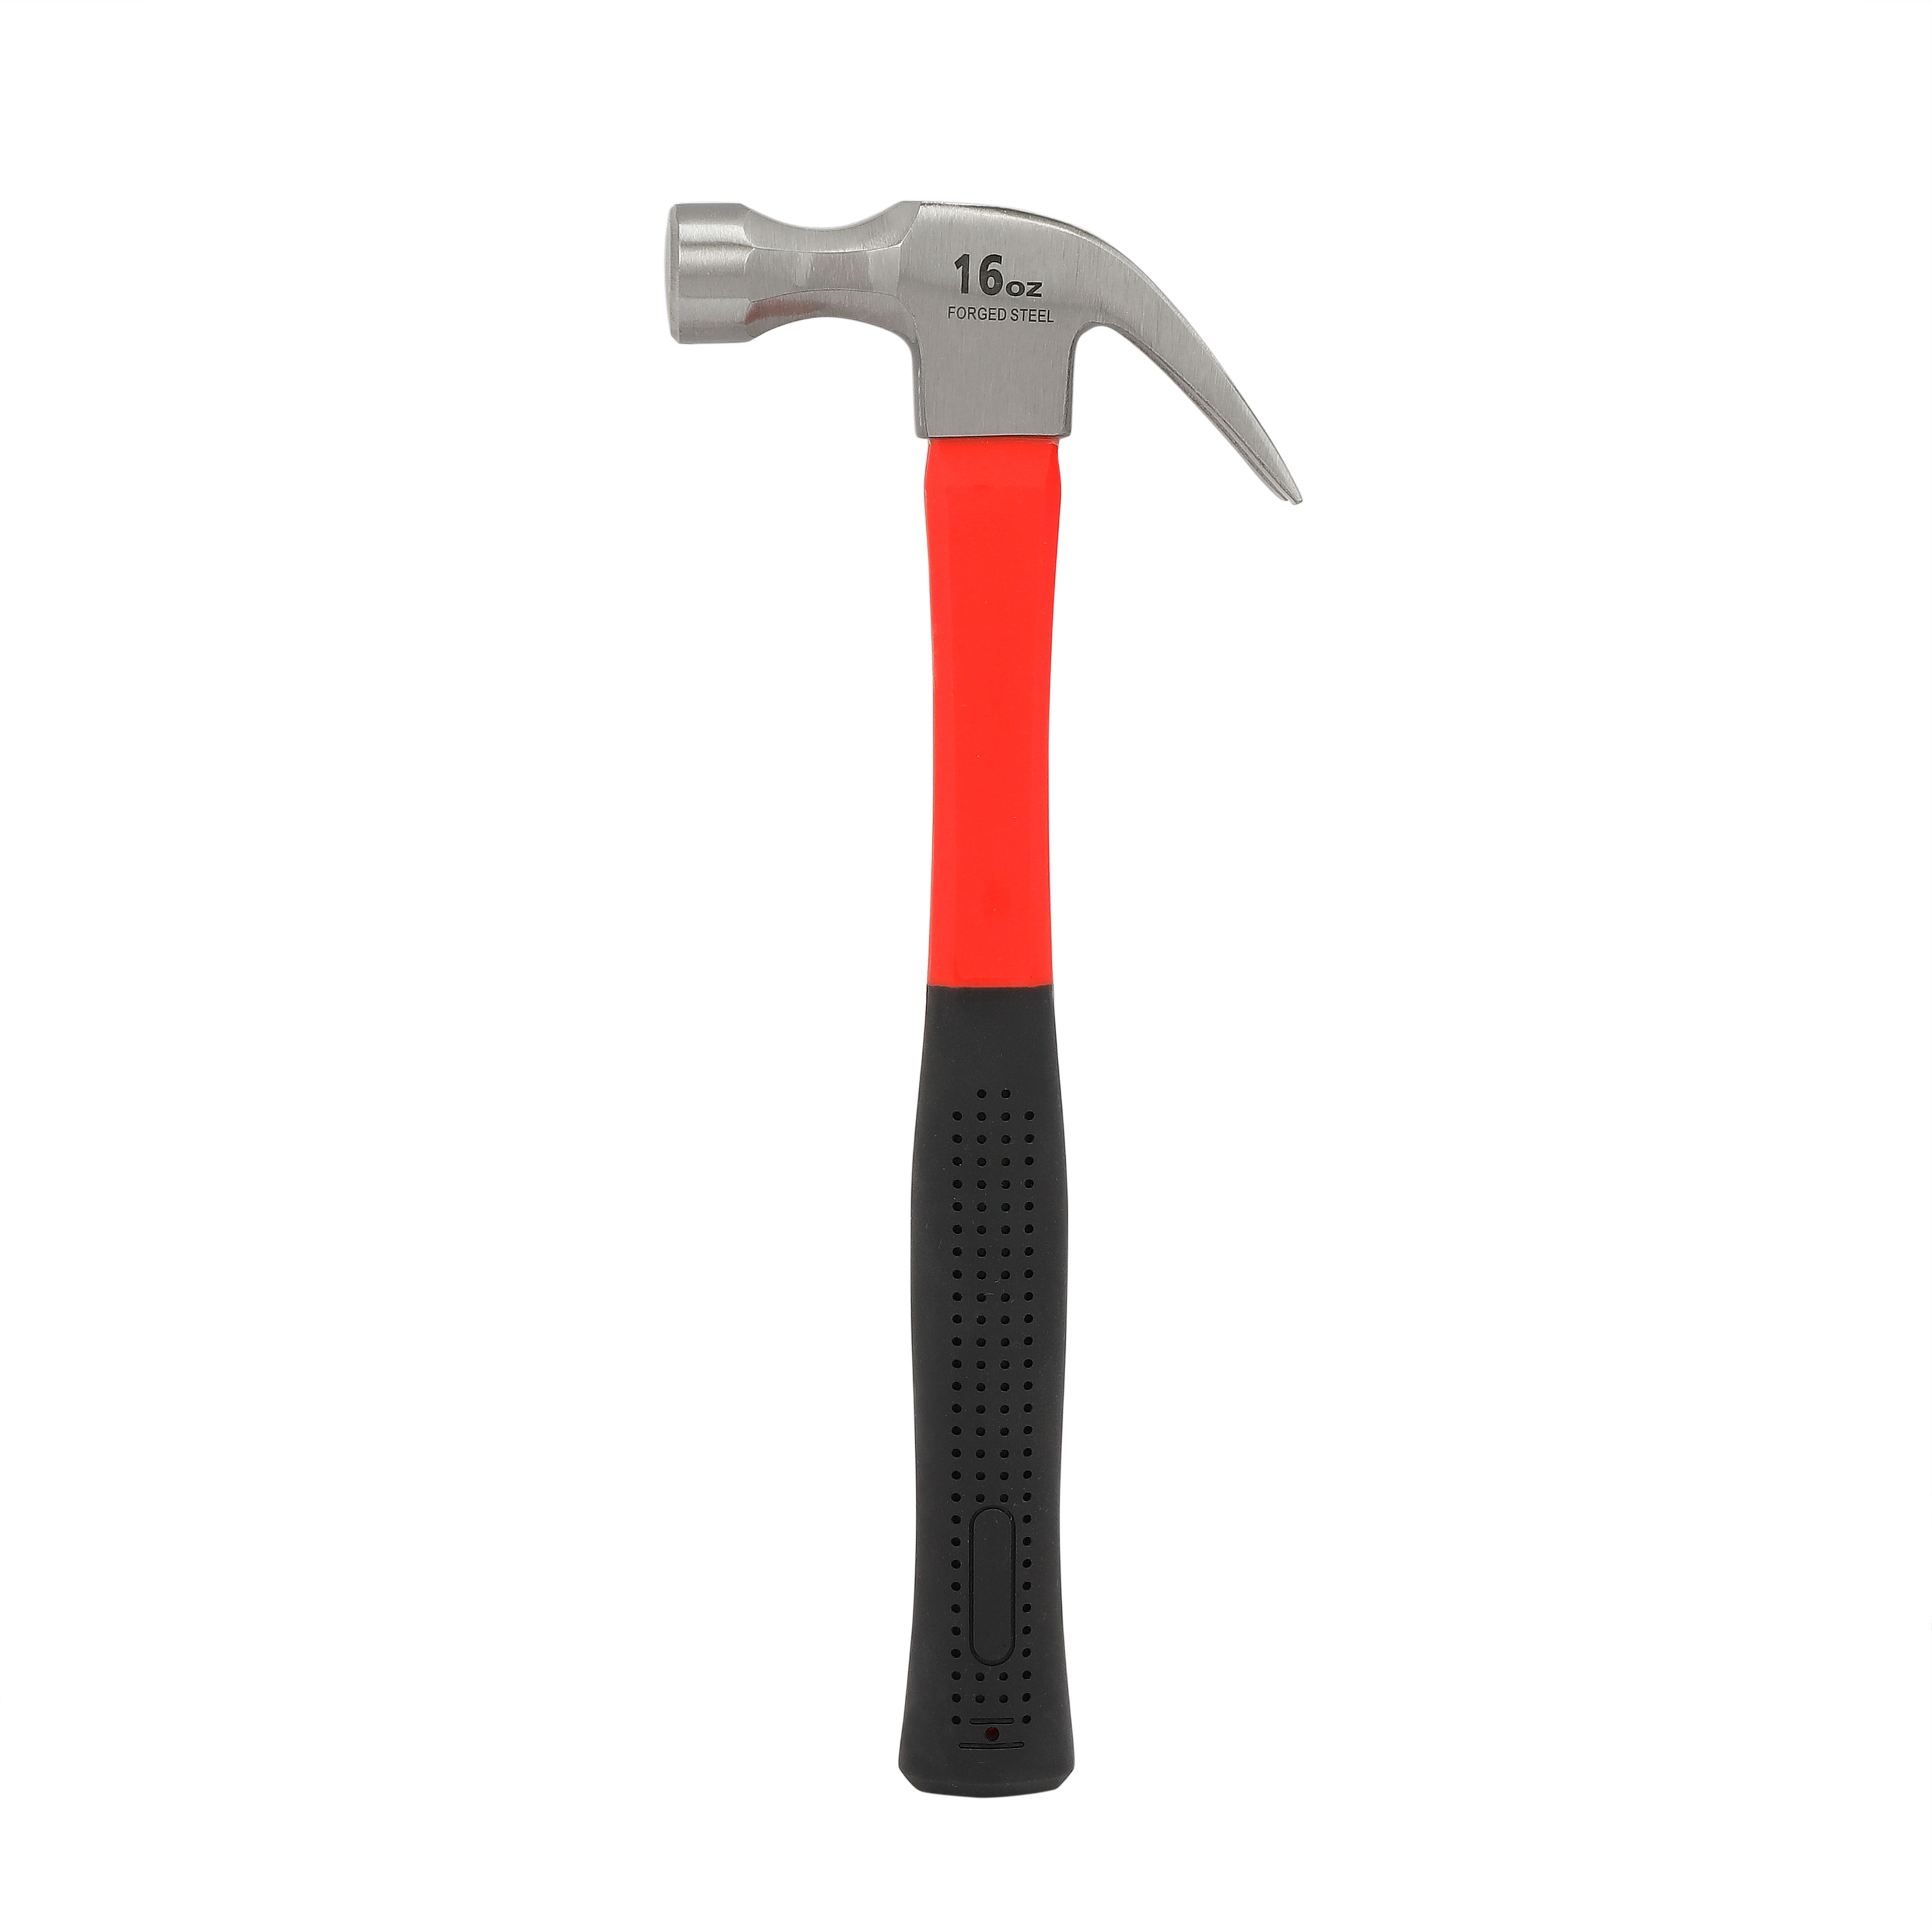 WORKPRO 16-oz Smooth Face Steel Head Fiberglass Claw Hammer in the Hammers  department at